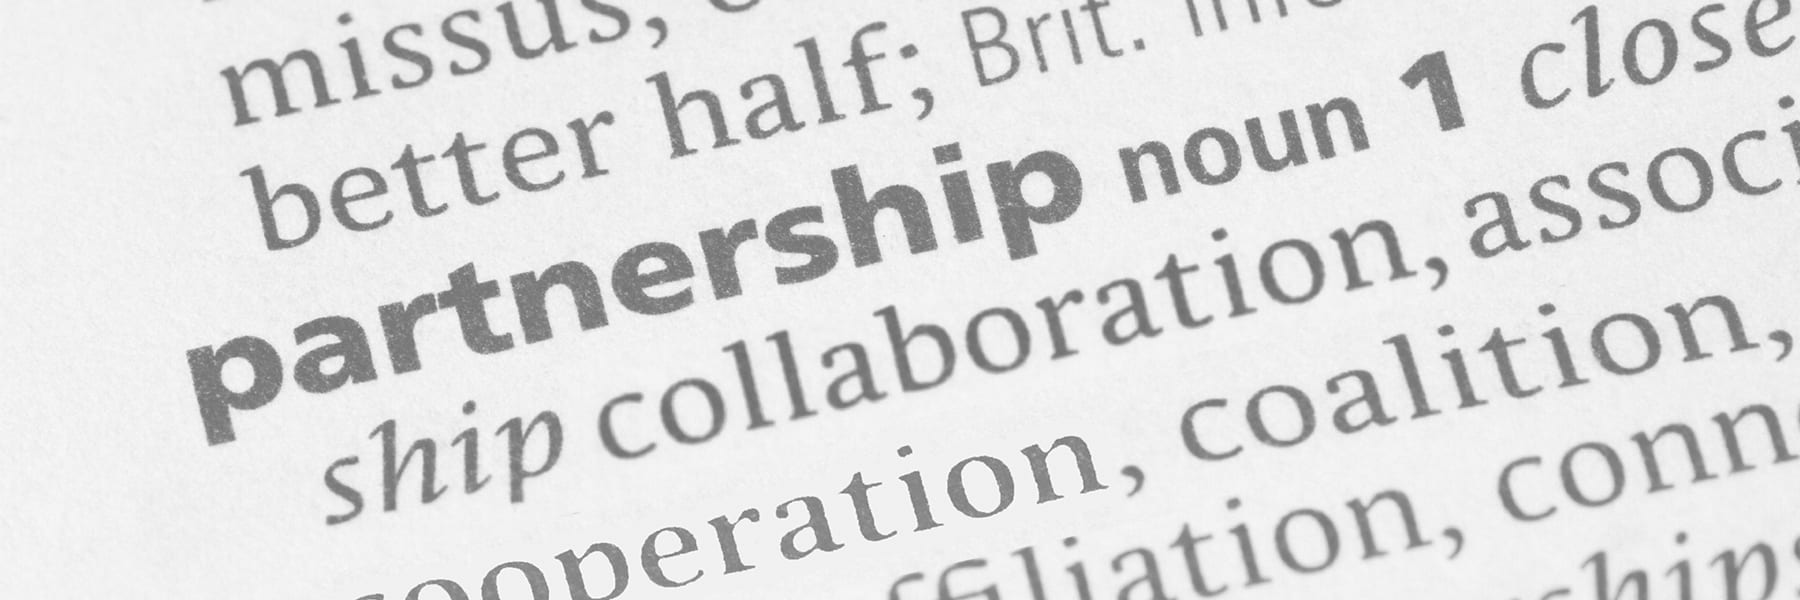 Dictionary definition of partnership and collaboration.